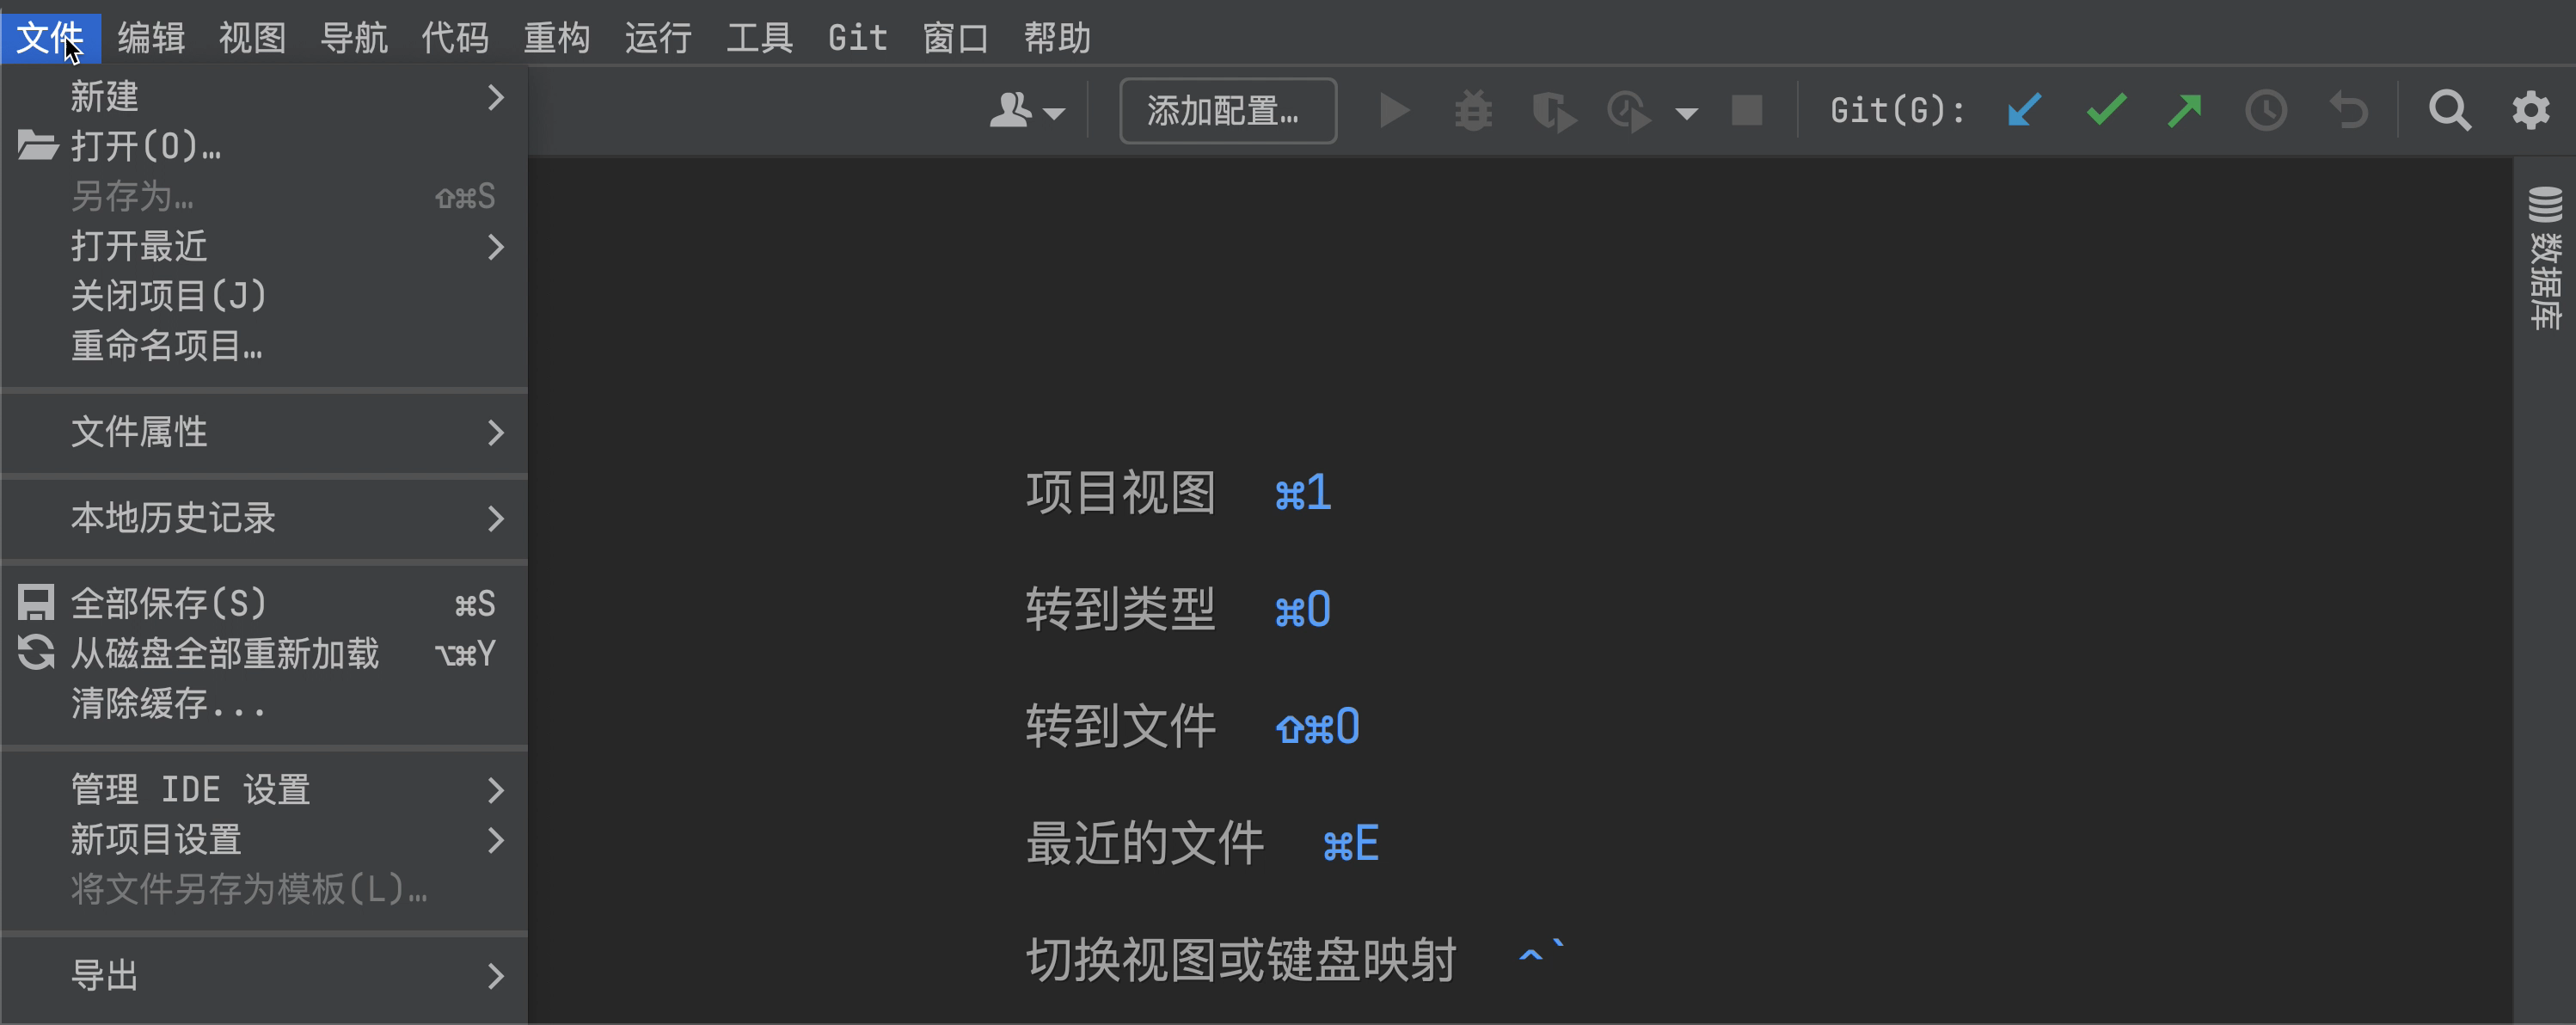 GoLand’s user interface in Chinese